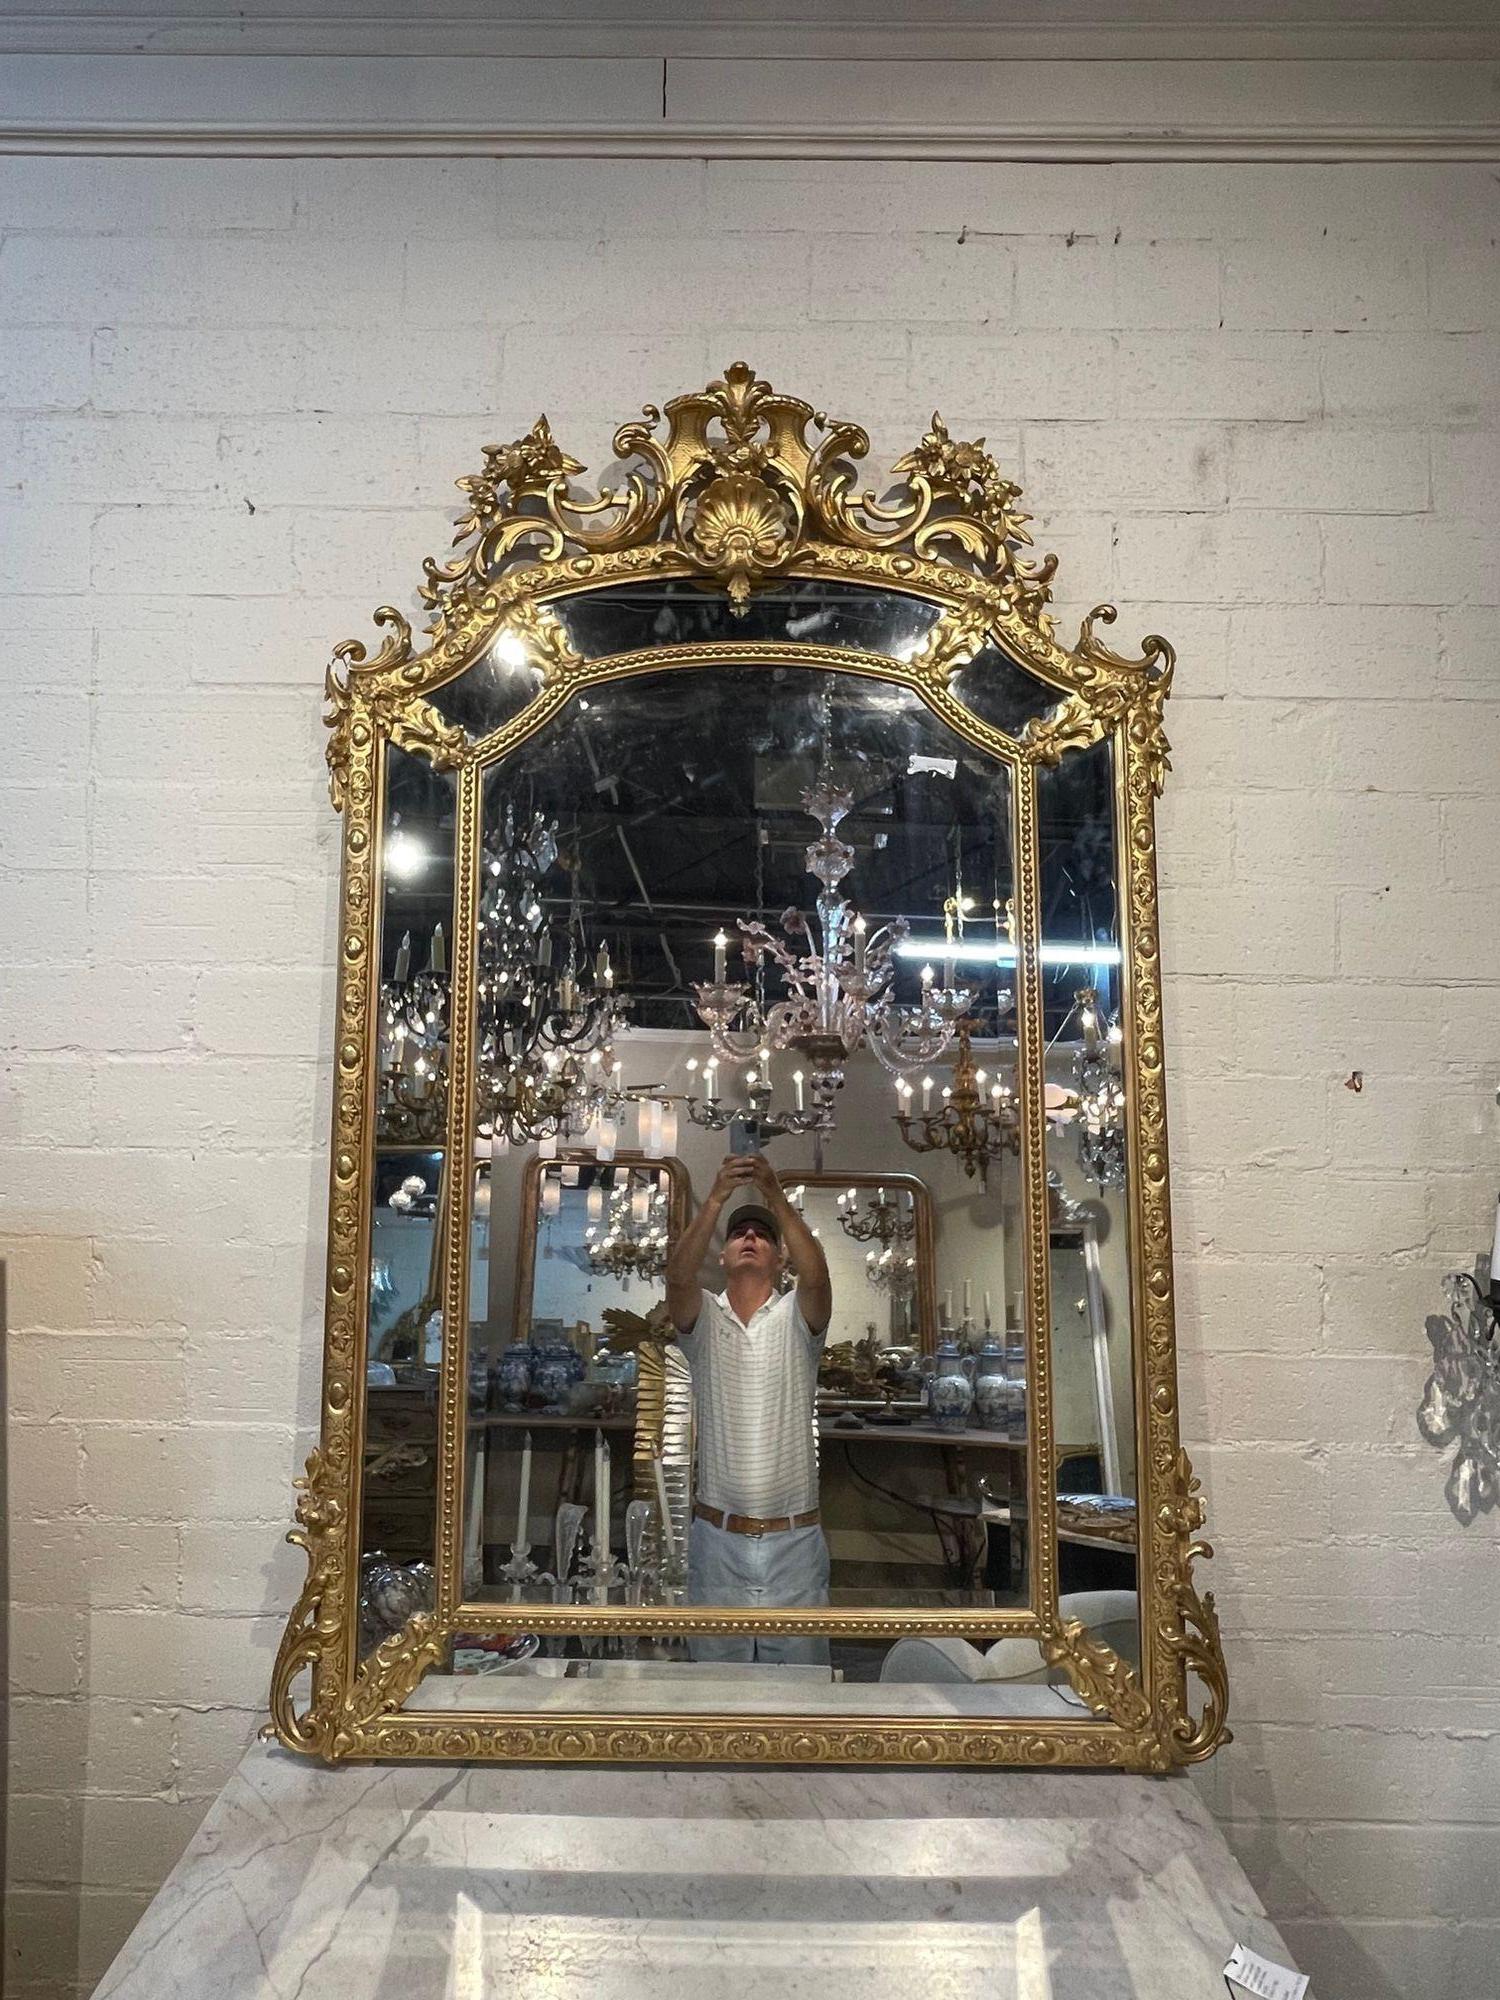 Large scale 19th century French Louis XVI style carved and giltwood mirror. Featuring elaborate carvings including a decorative crest with leaves, flowers and a shell. So elegant!